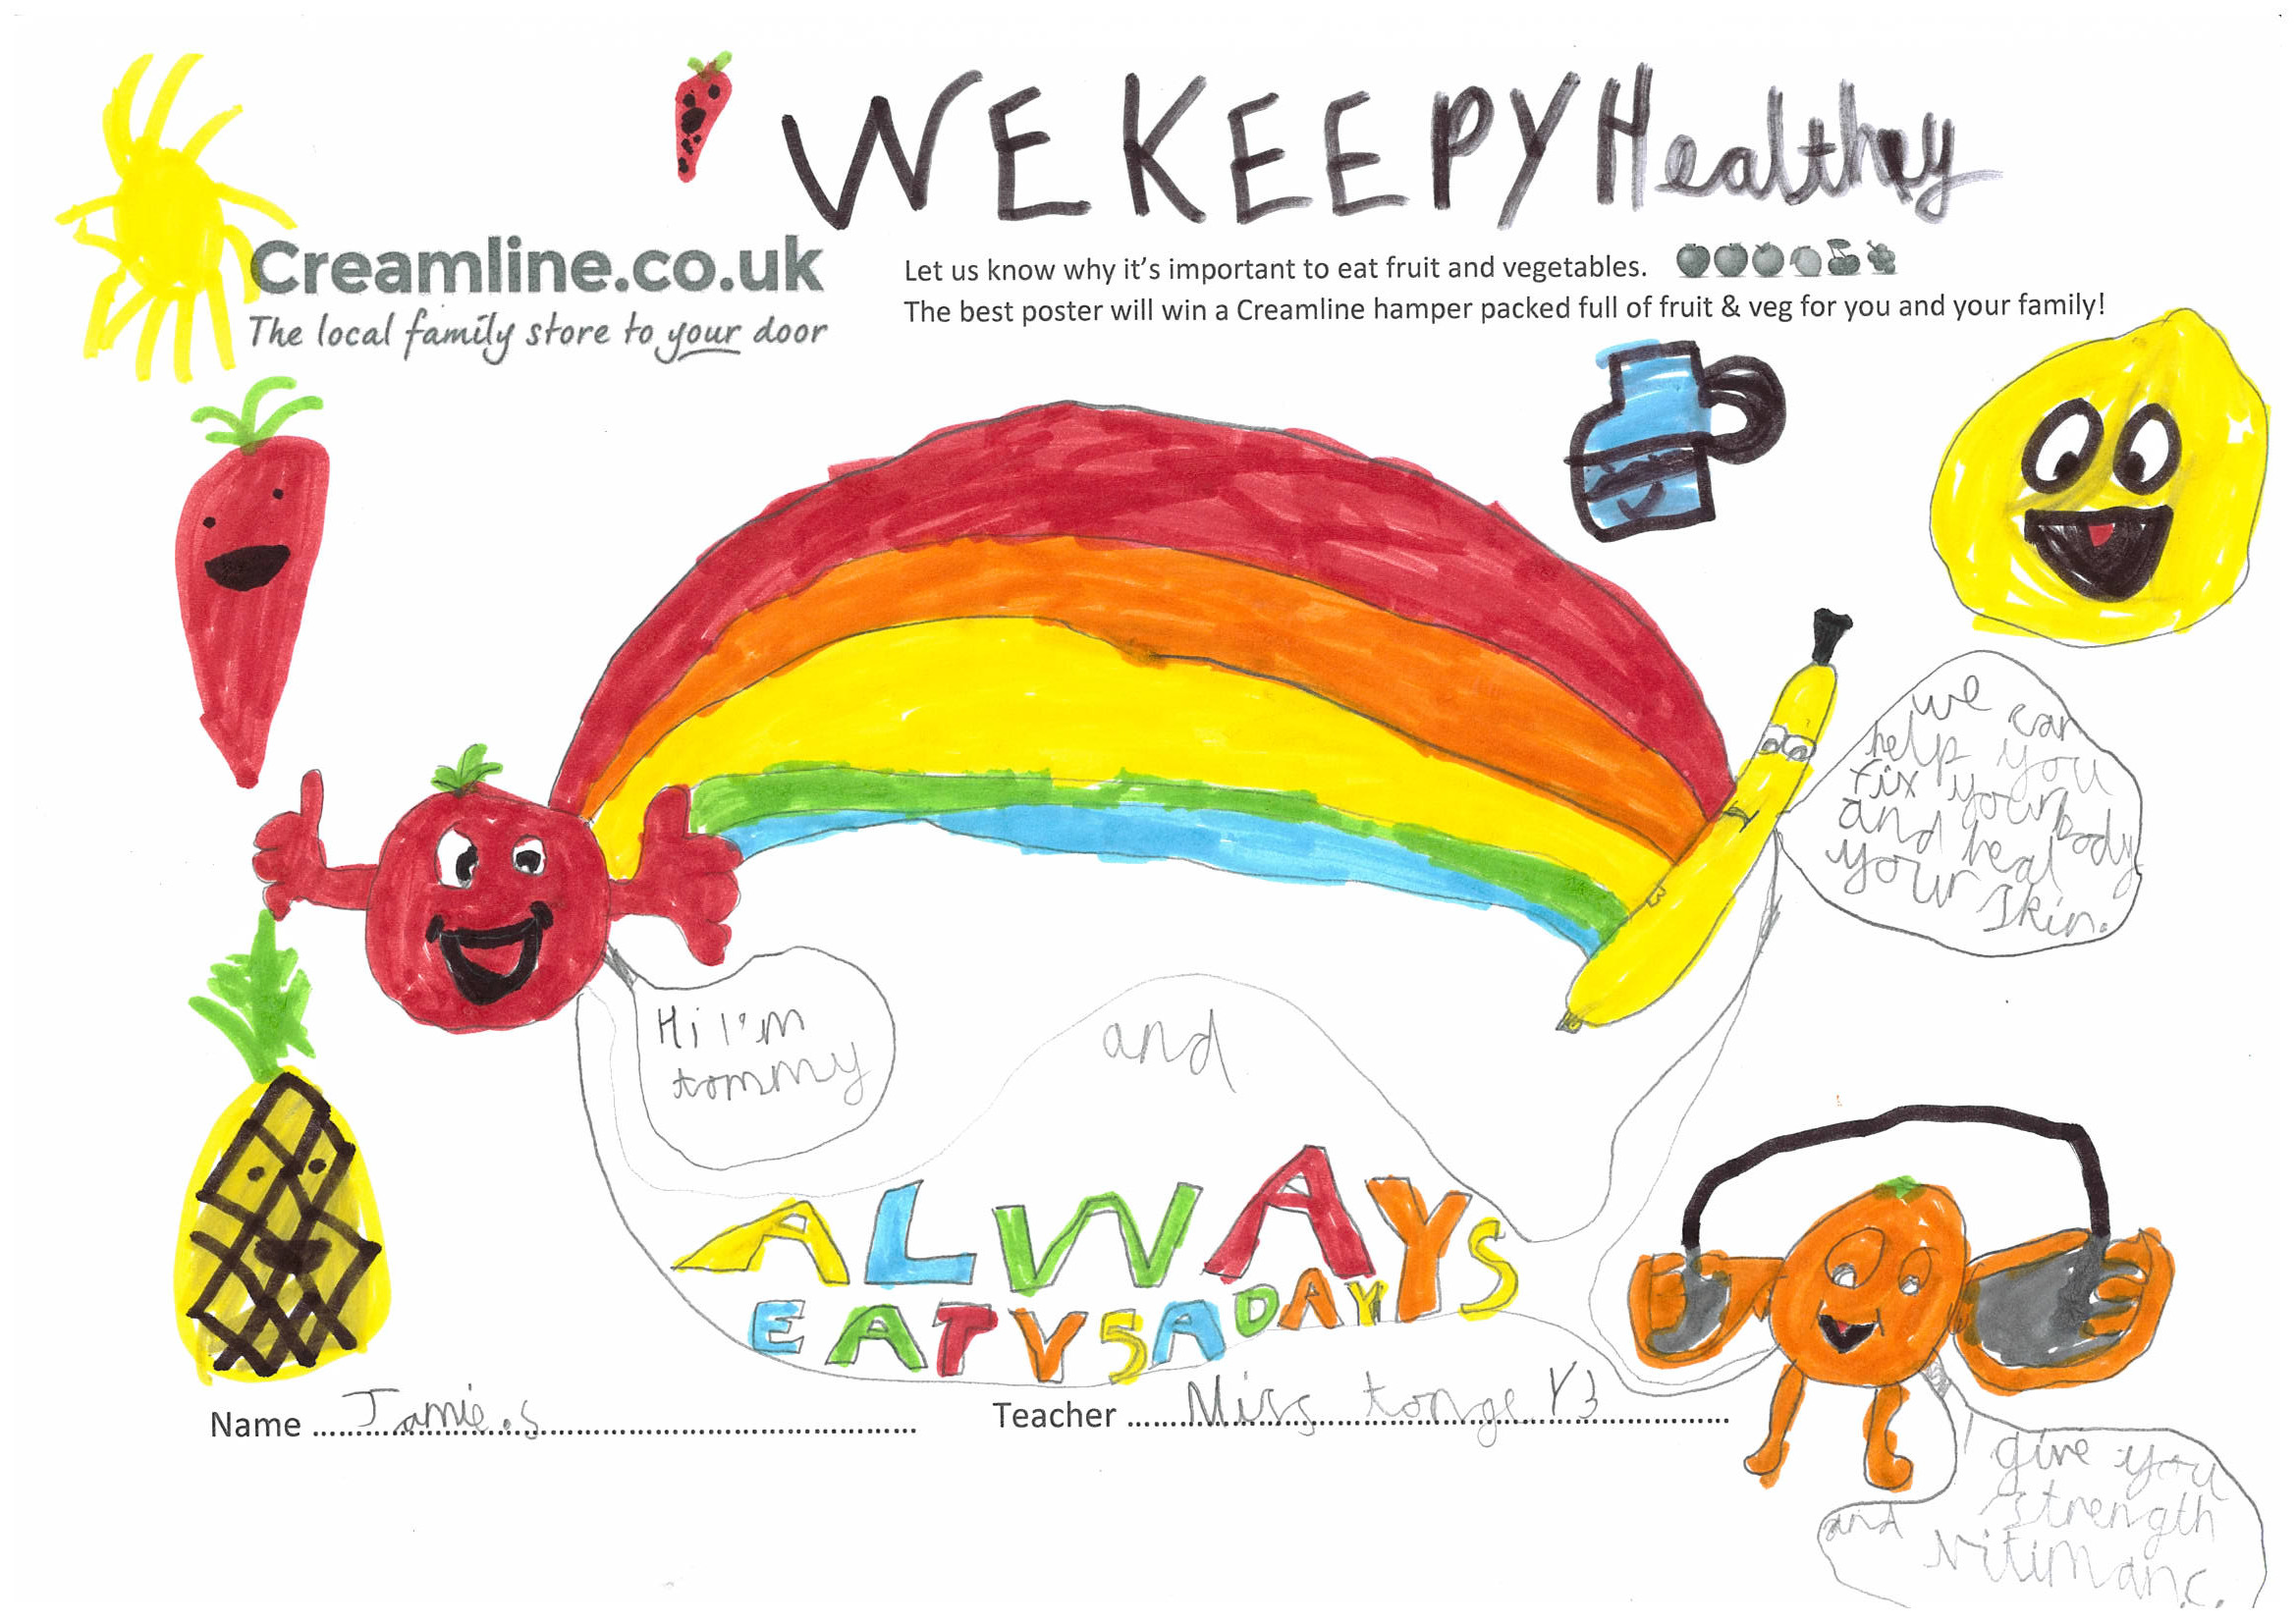 Entry from Jamie , Newchurch Primary